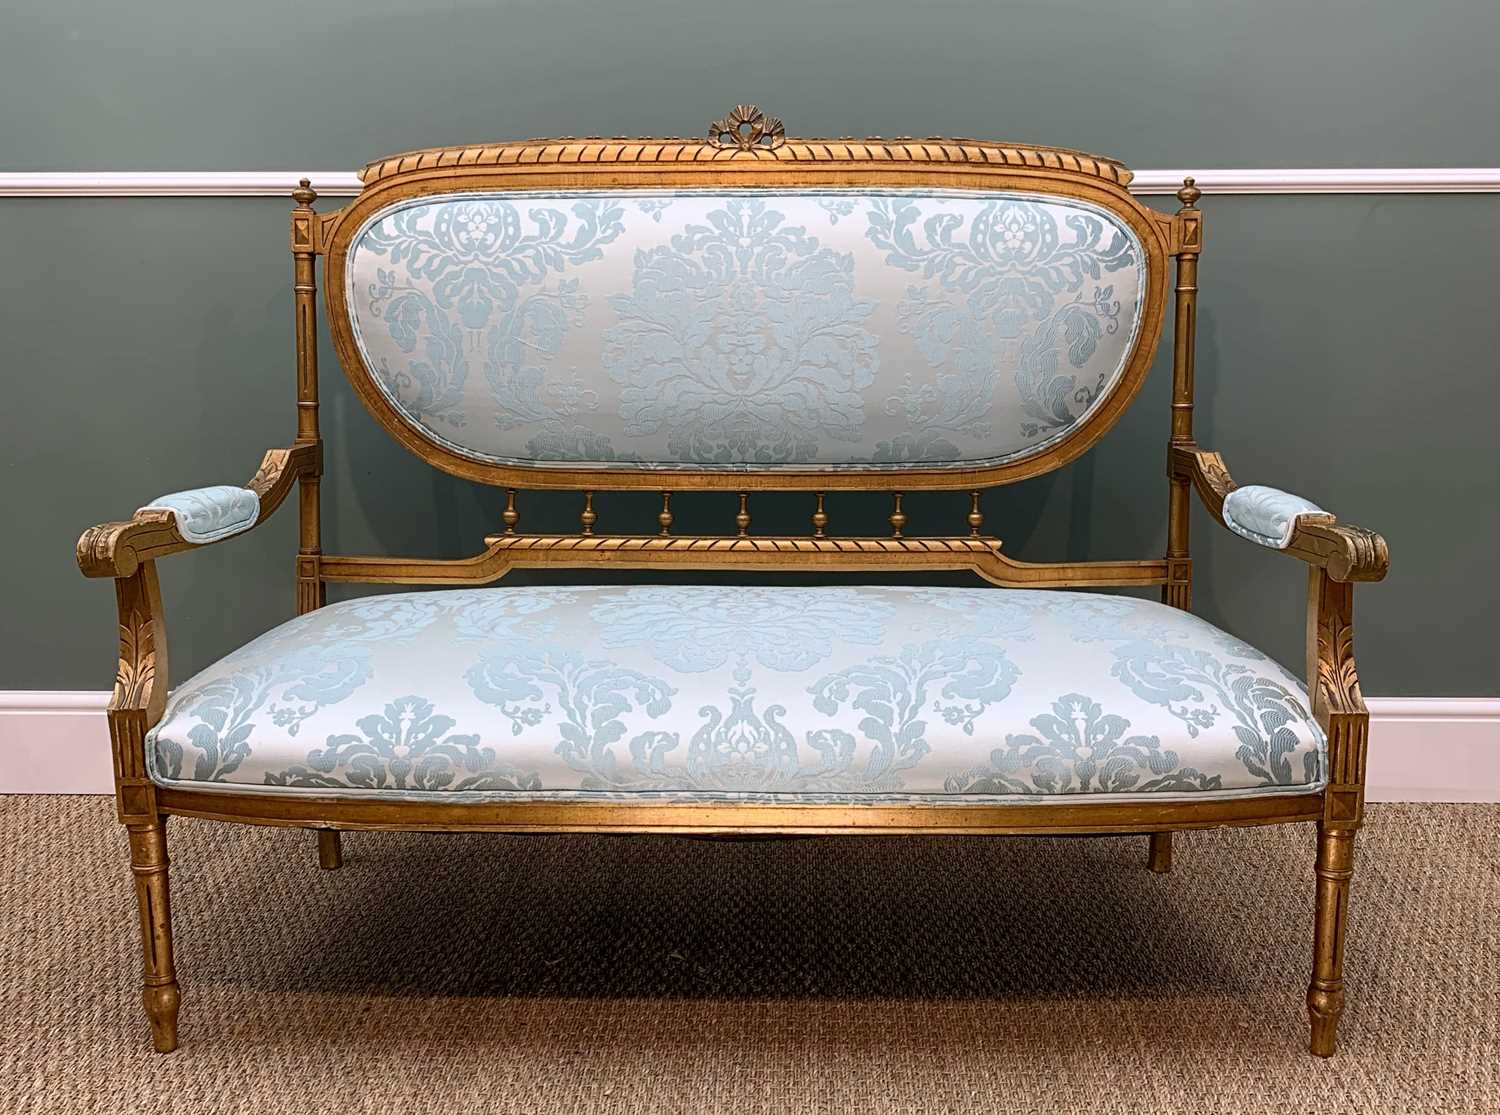 LOUIS XVI-STYLE GILTWOOD SALON SUITE, leaf carved arms and turquoise floral embroidered damask - Image 2 of 5